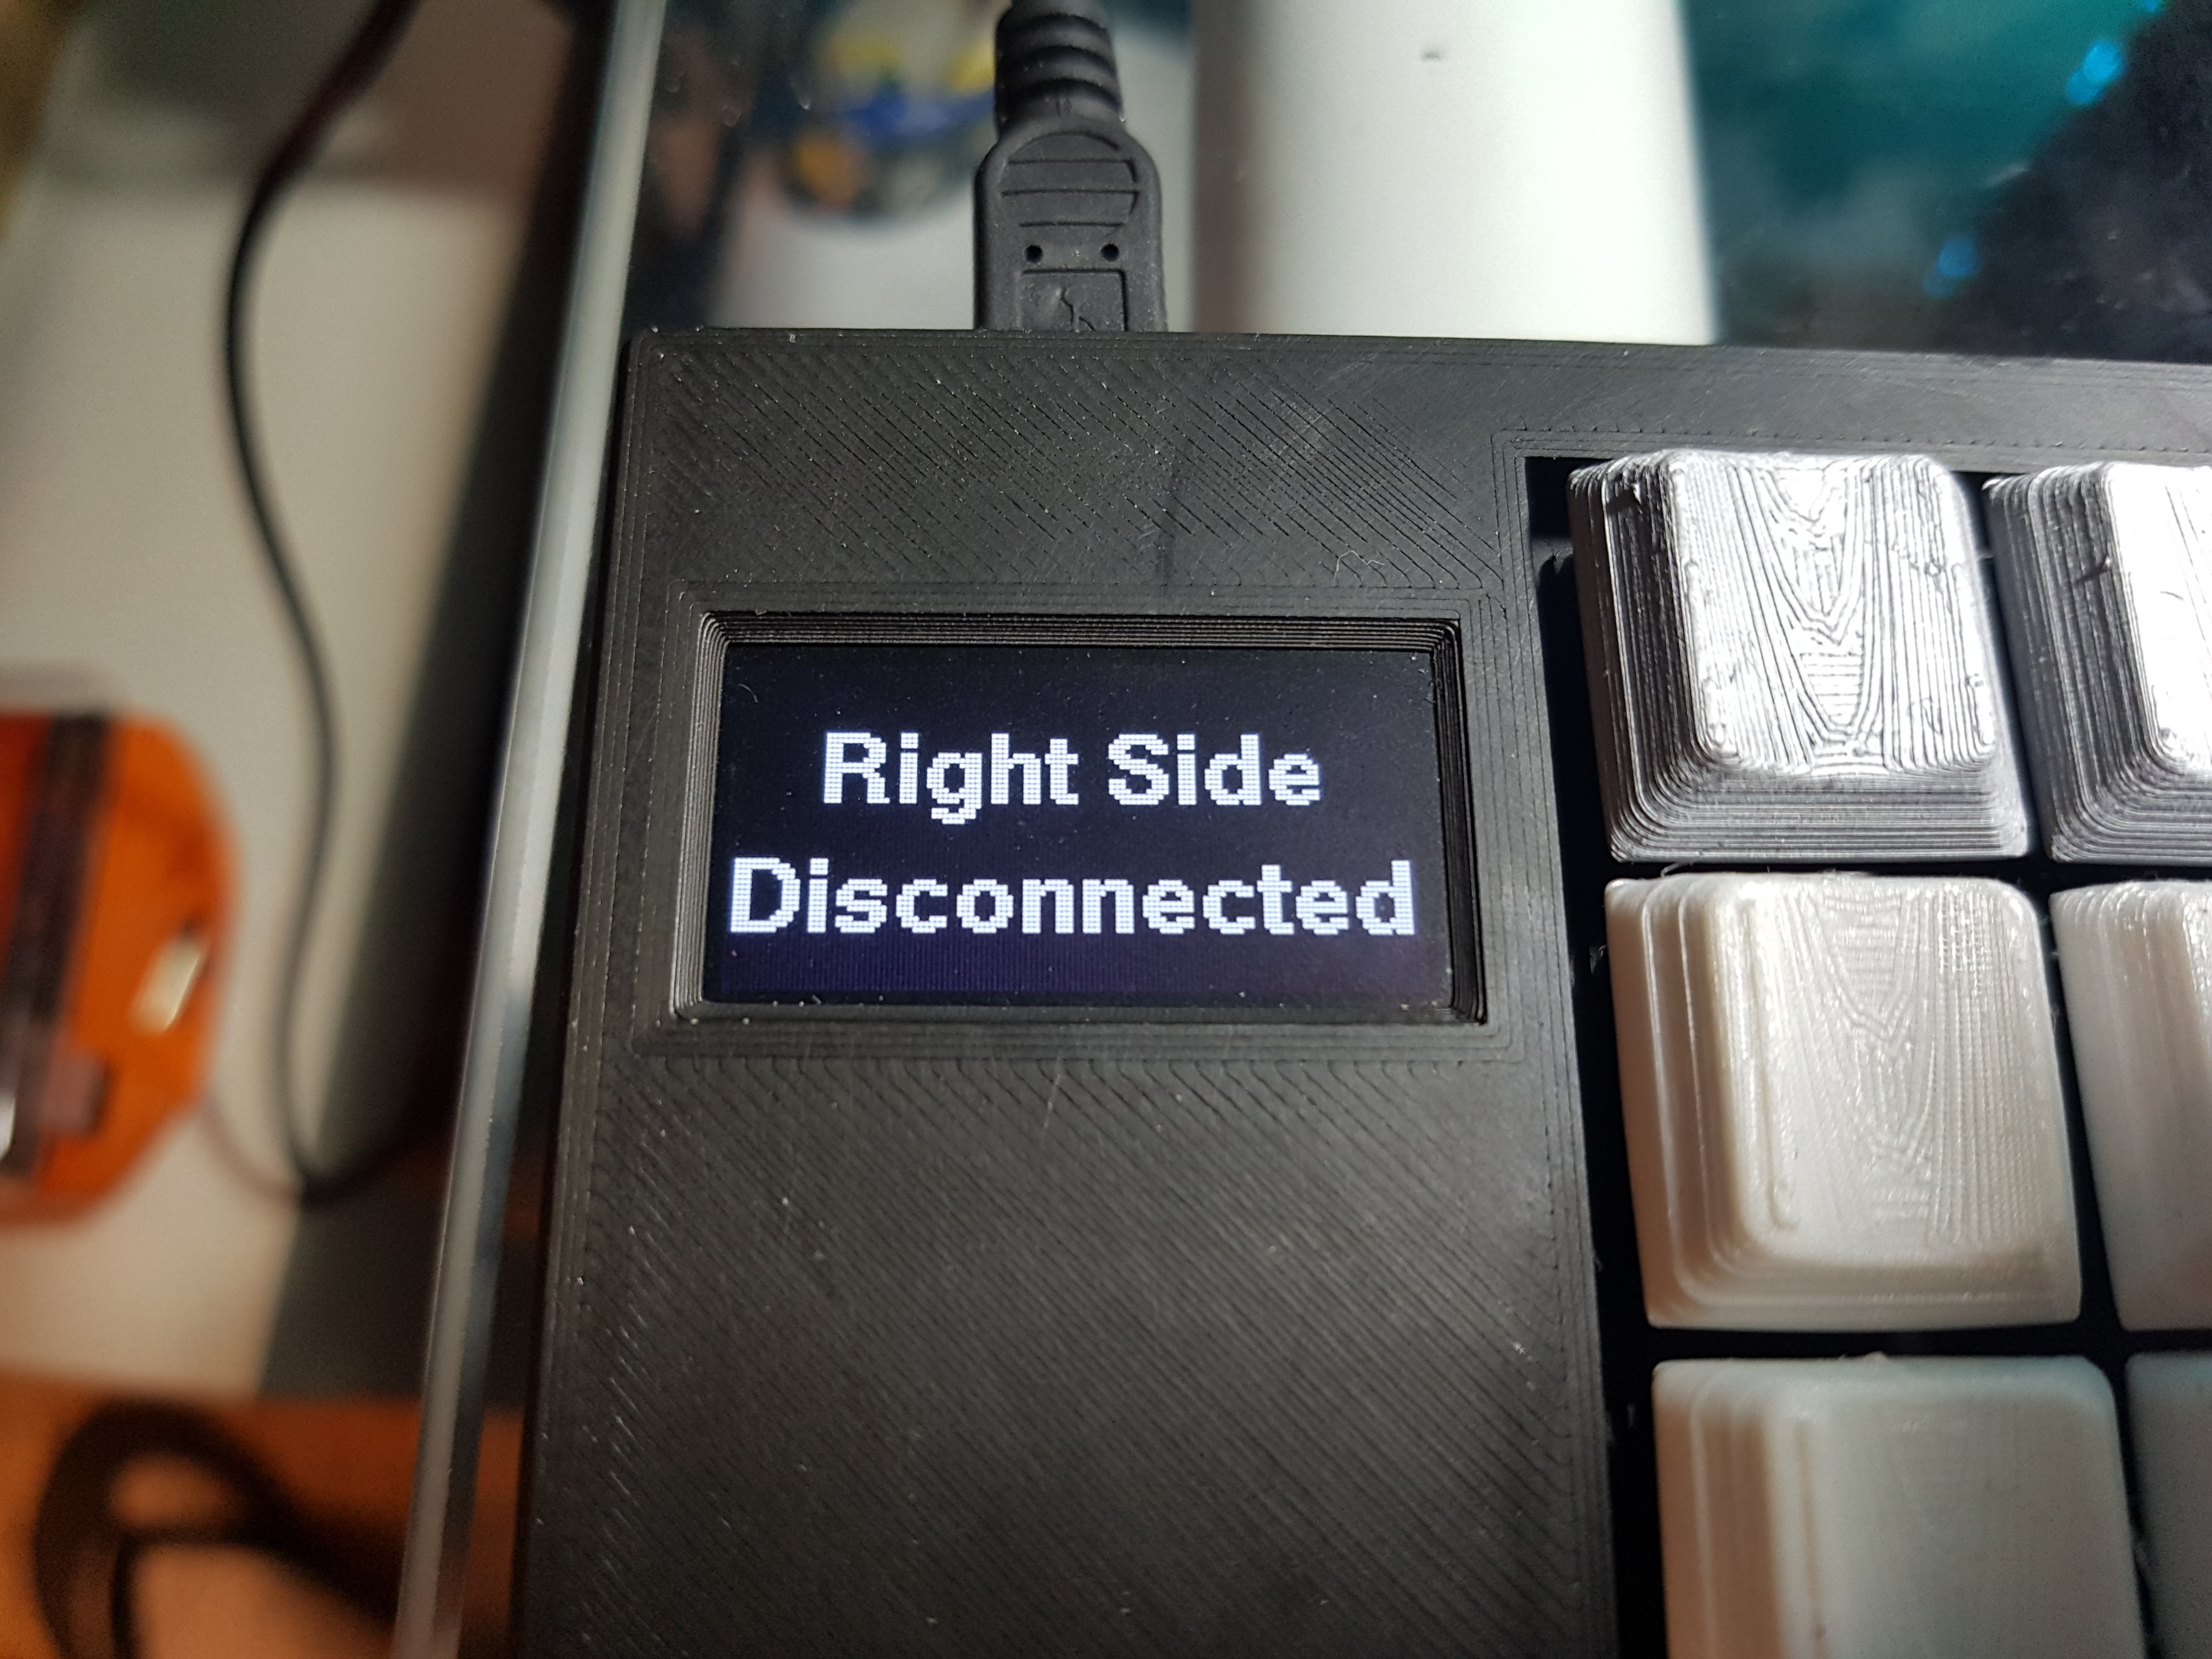 Right side disconnected